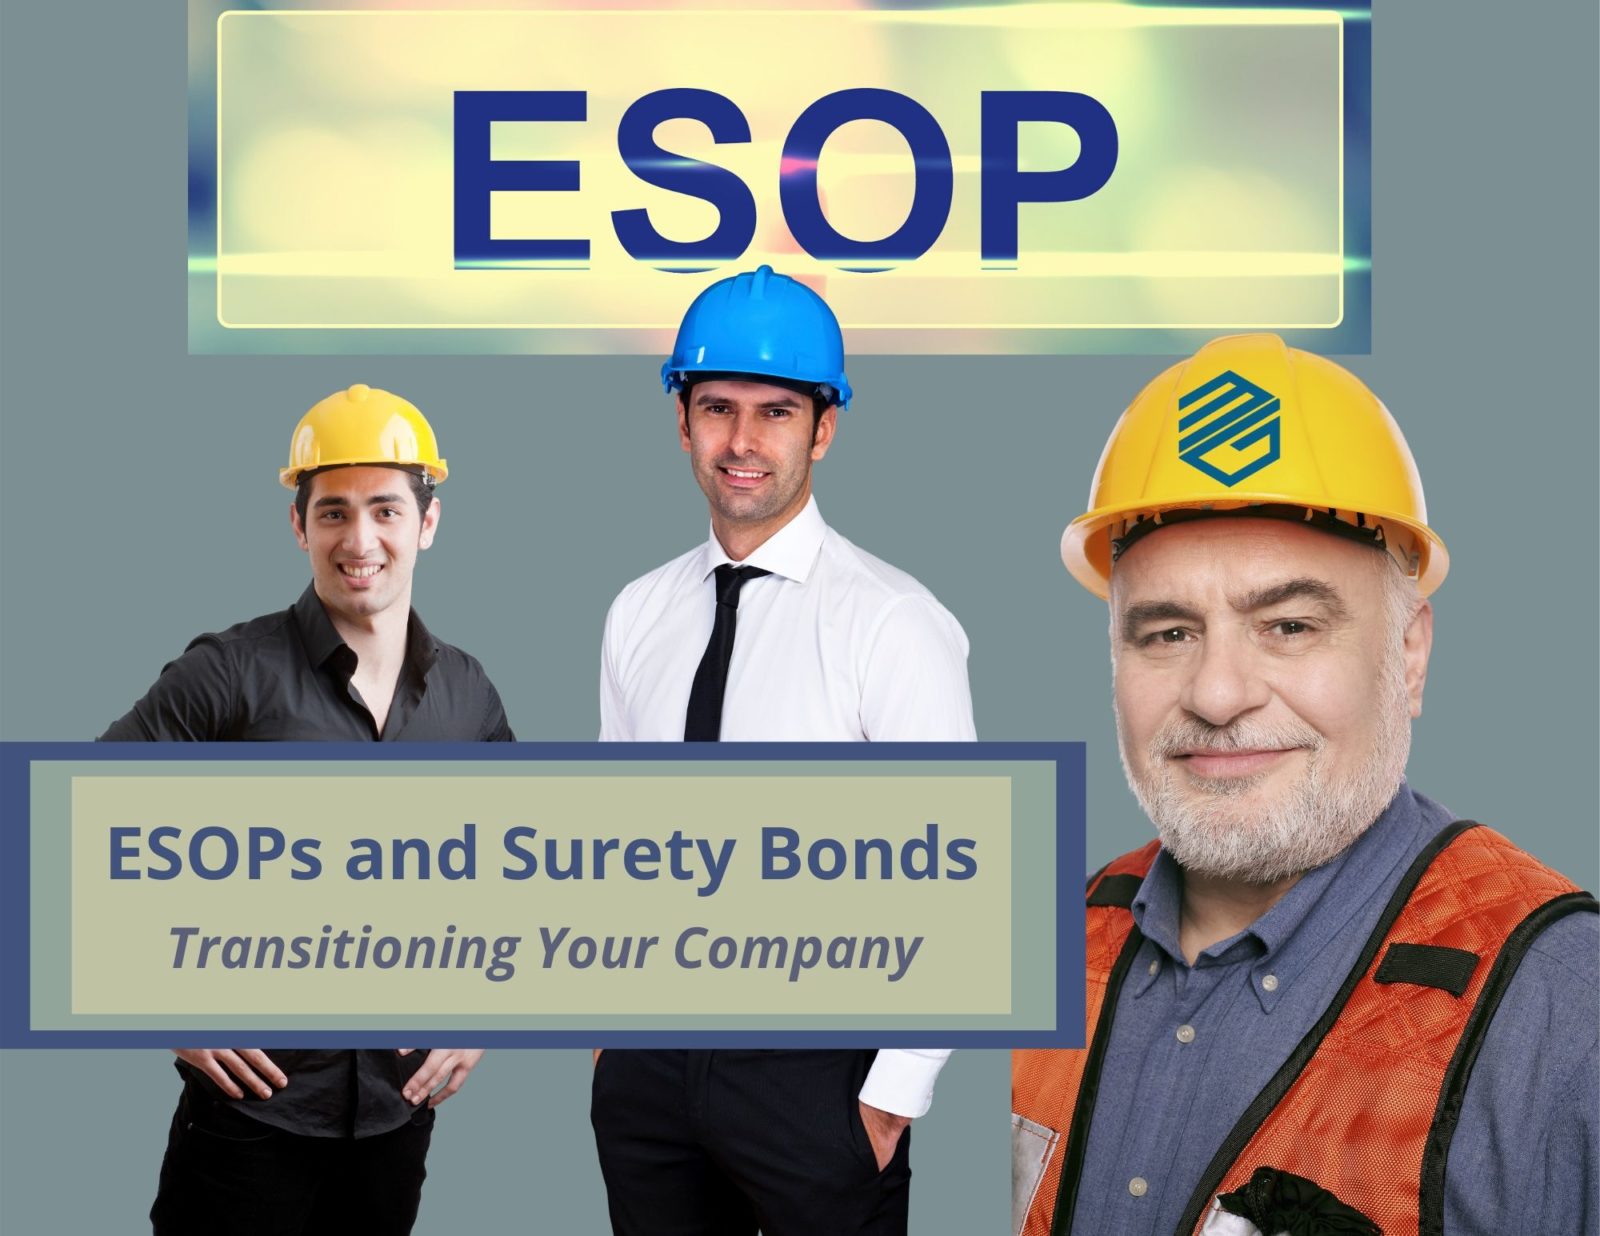 ESOPs and Surety Bonds - A picture of three contractors. One older and two younger. A large sign up top says ESOP. A text box says" ESOPs and Surety Bonds". A smaller texts says, "Transitioning Your Company"